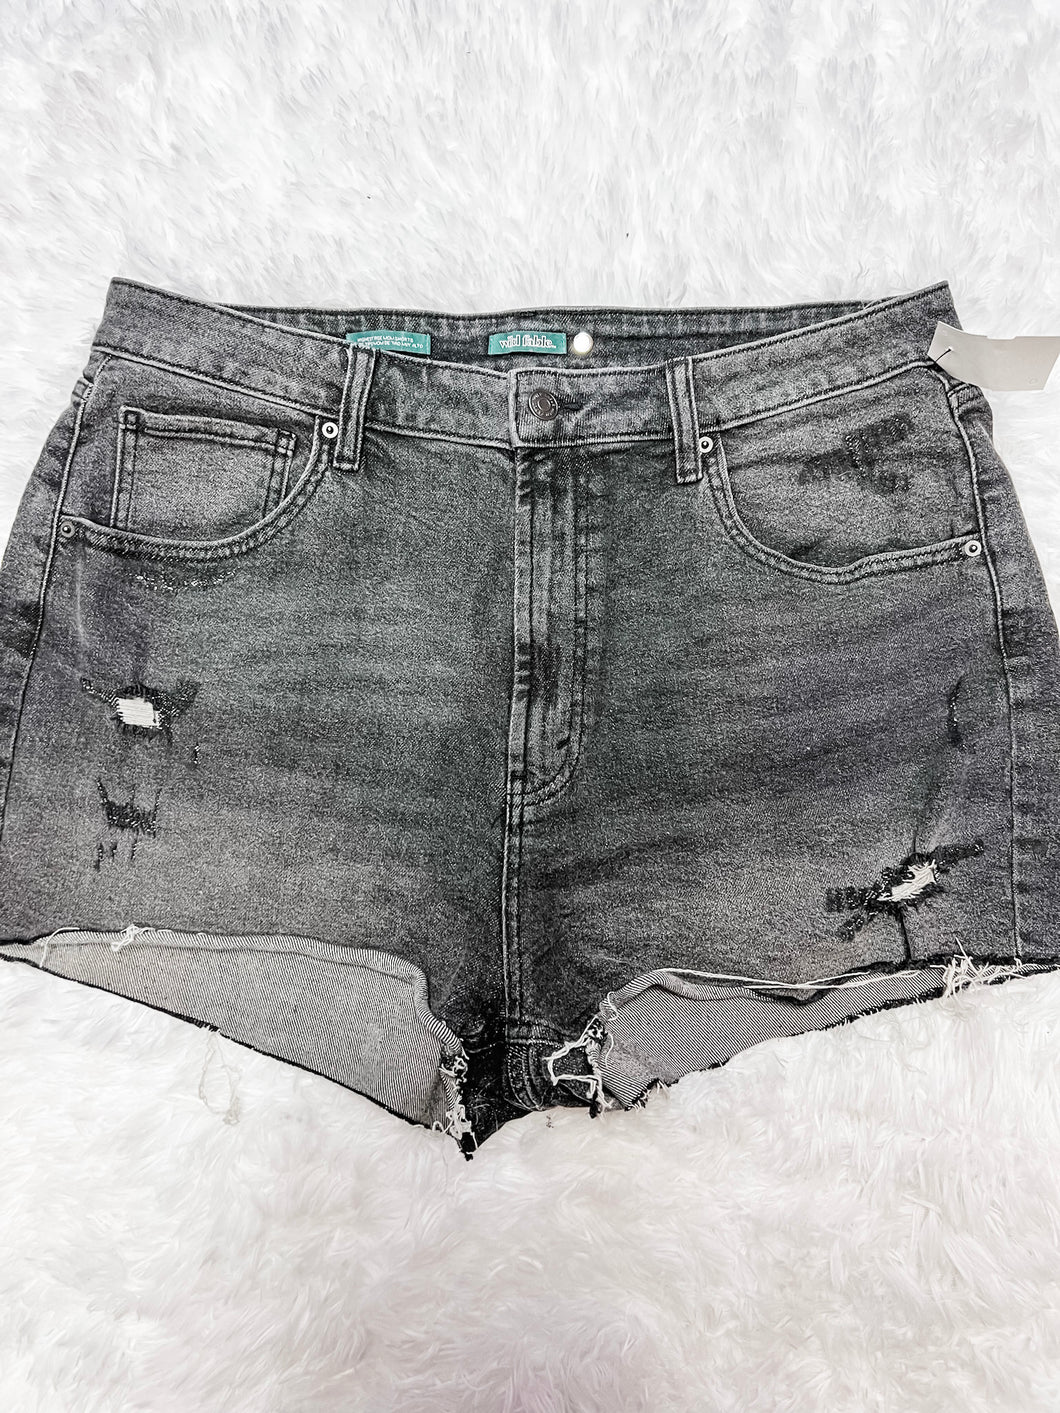 Wild Fable Shorts Size 15/16 *